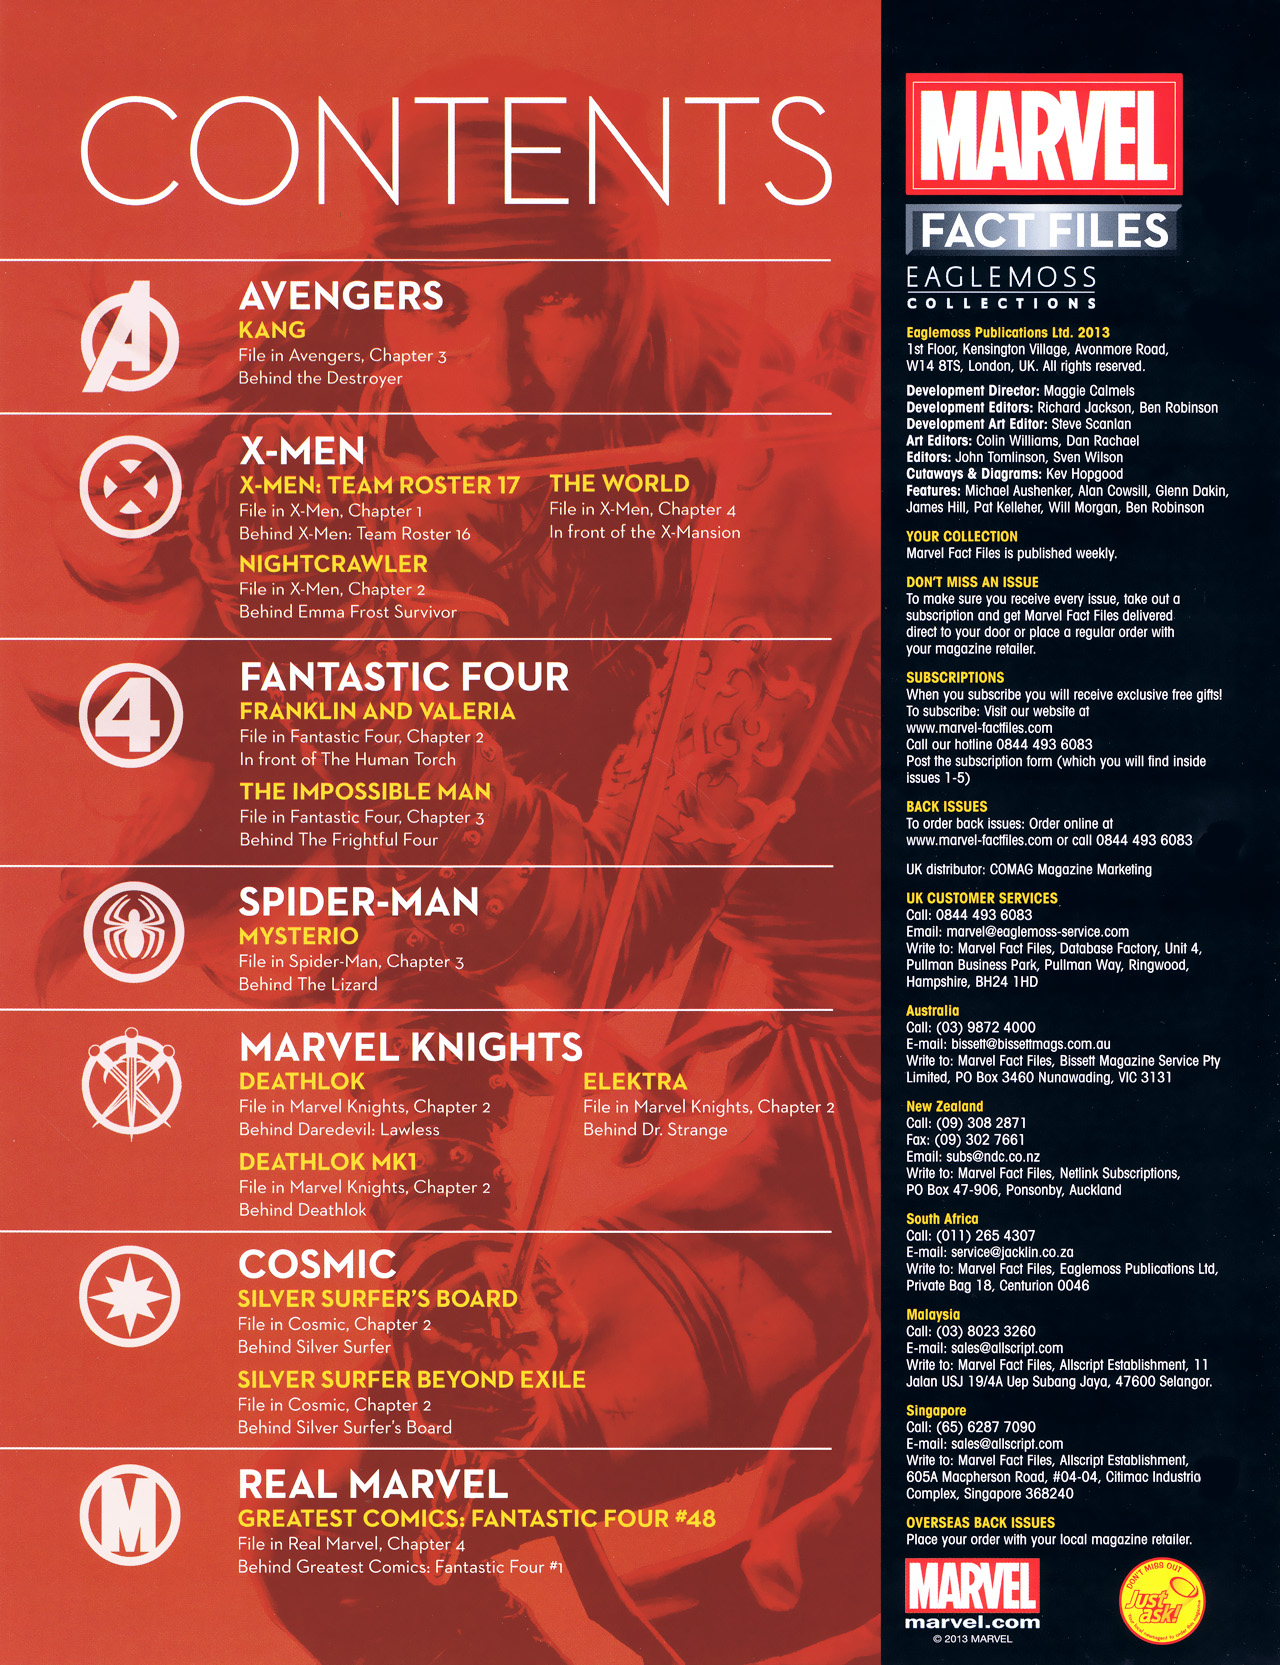 Read online Marvel Fact Files comic -  Issue #17 - 2